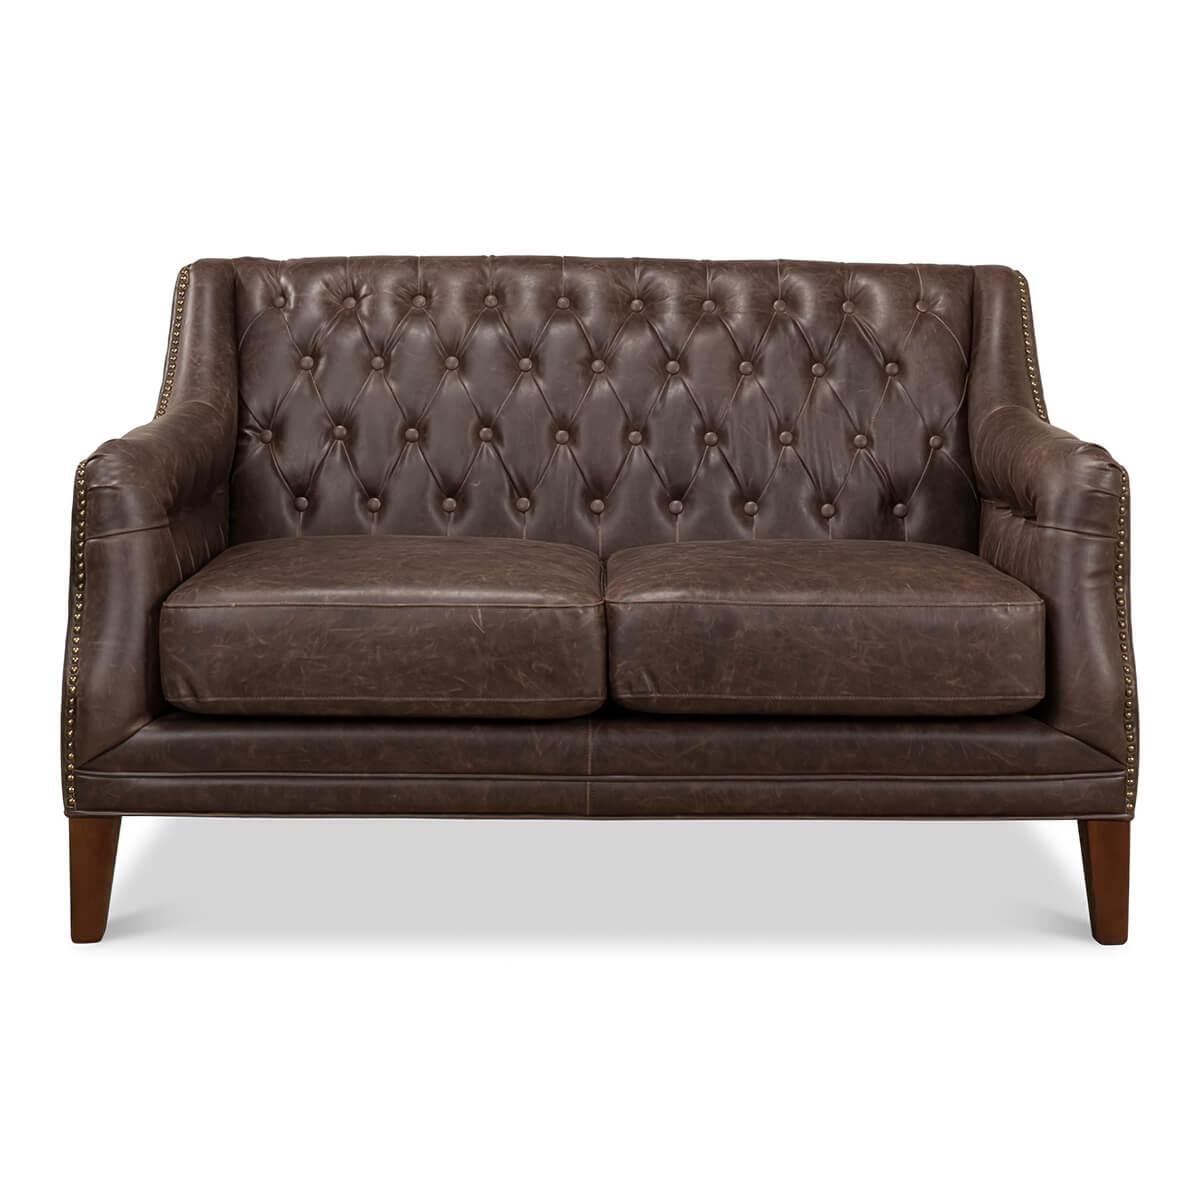 A Classic tufted two-seat sofa with a bicast bonded chocolate-colored vintage style leather upholstery, with a tufted cushion backrest, and sides with two cushions on square tapered legs and finished with brass nailhead trim details.

Dimensions: